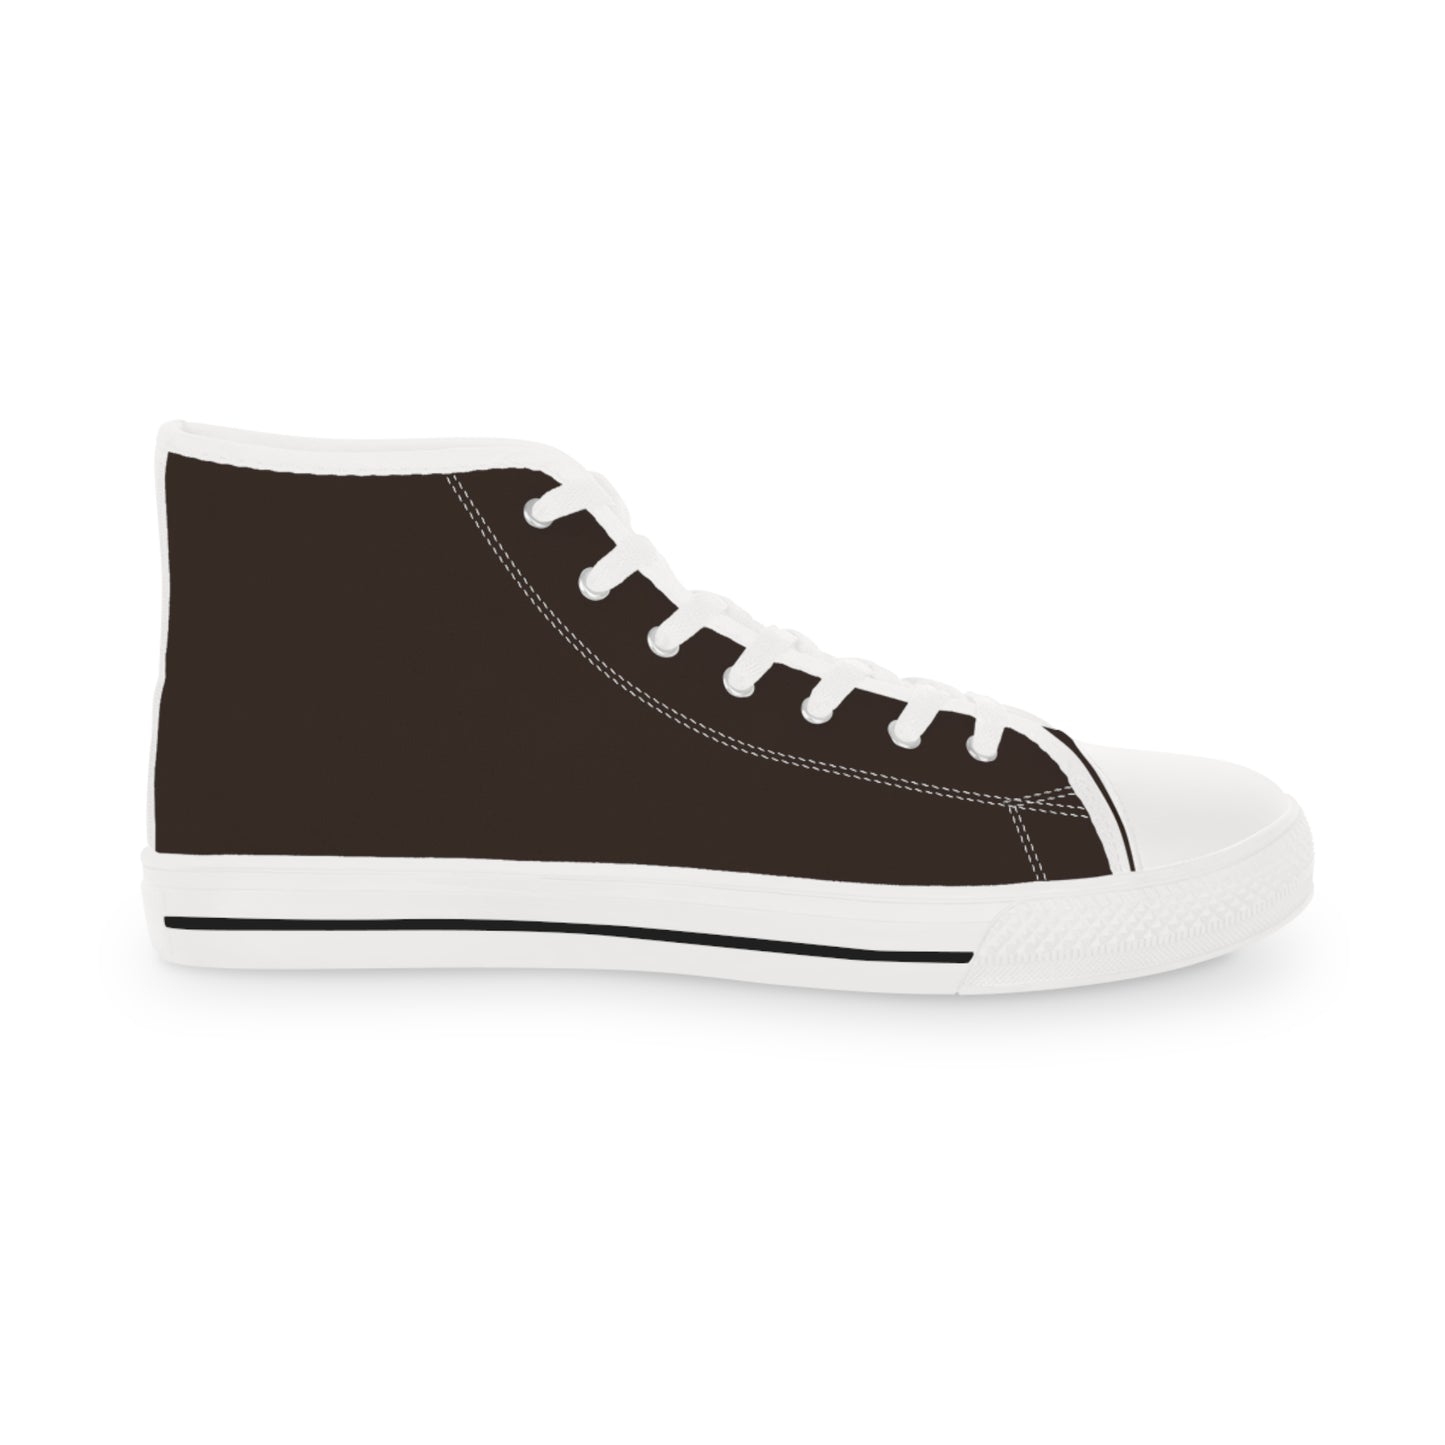 Men's Canvas High Top Solid Color Sneakers - Chocolate Cherry US 14 White sole